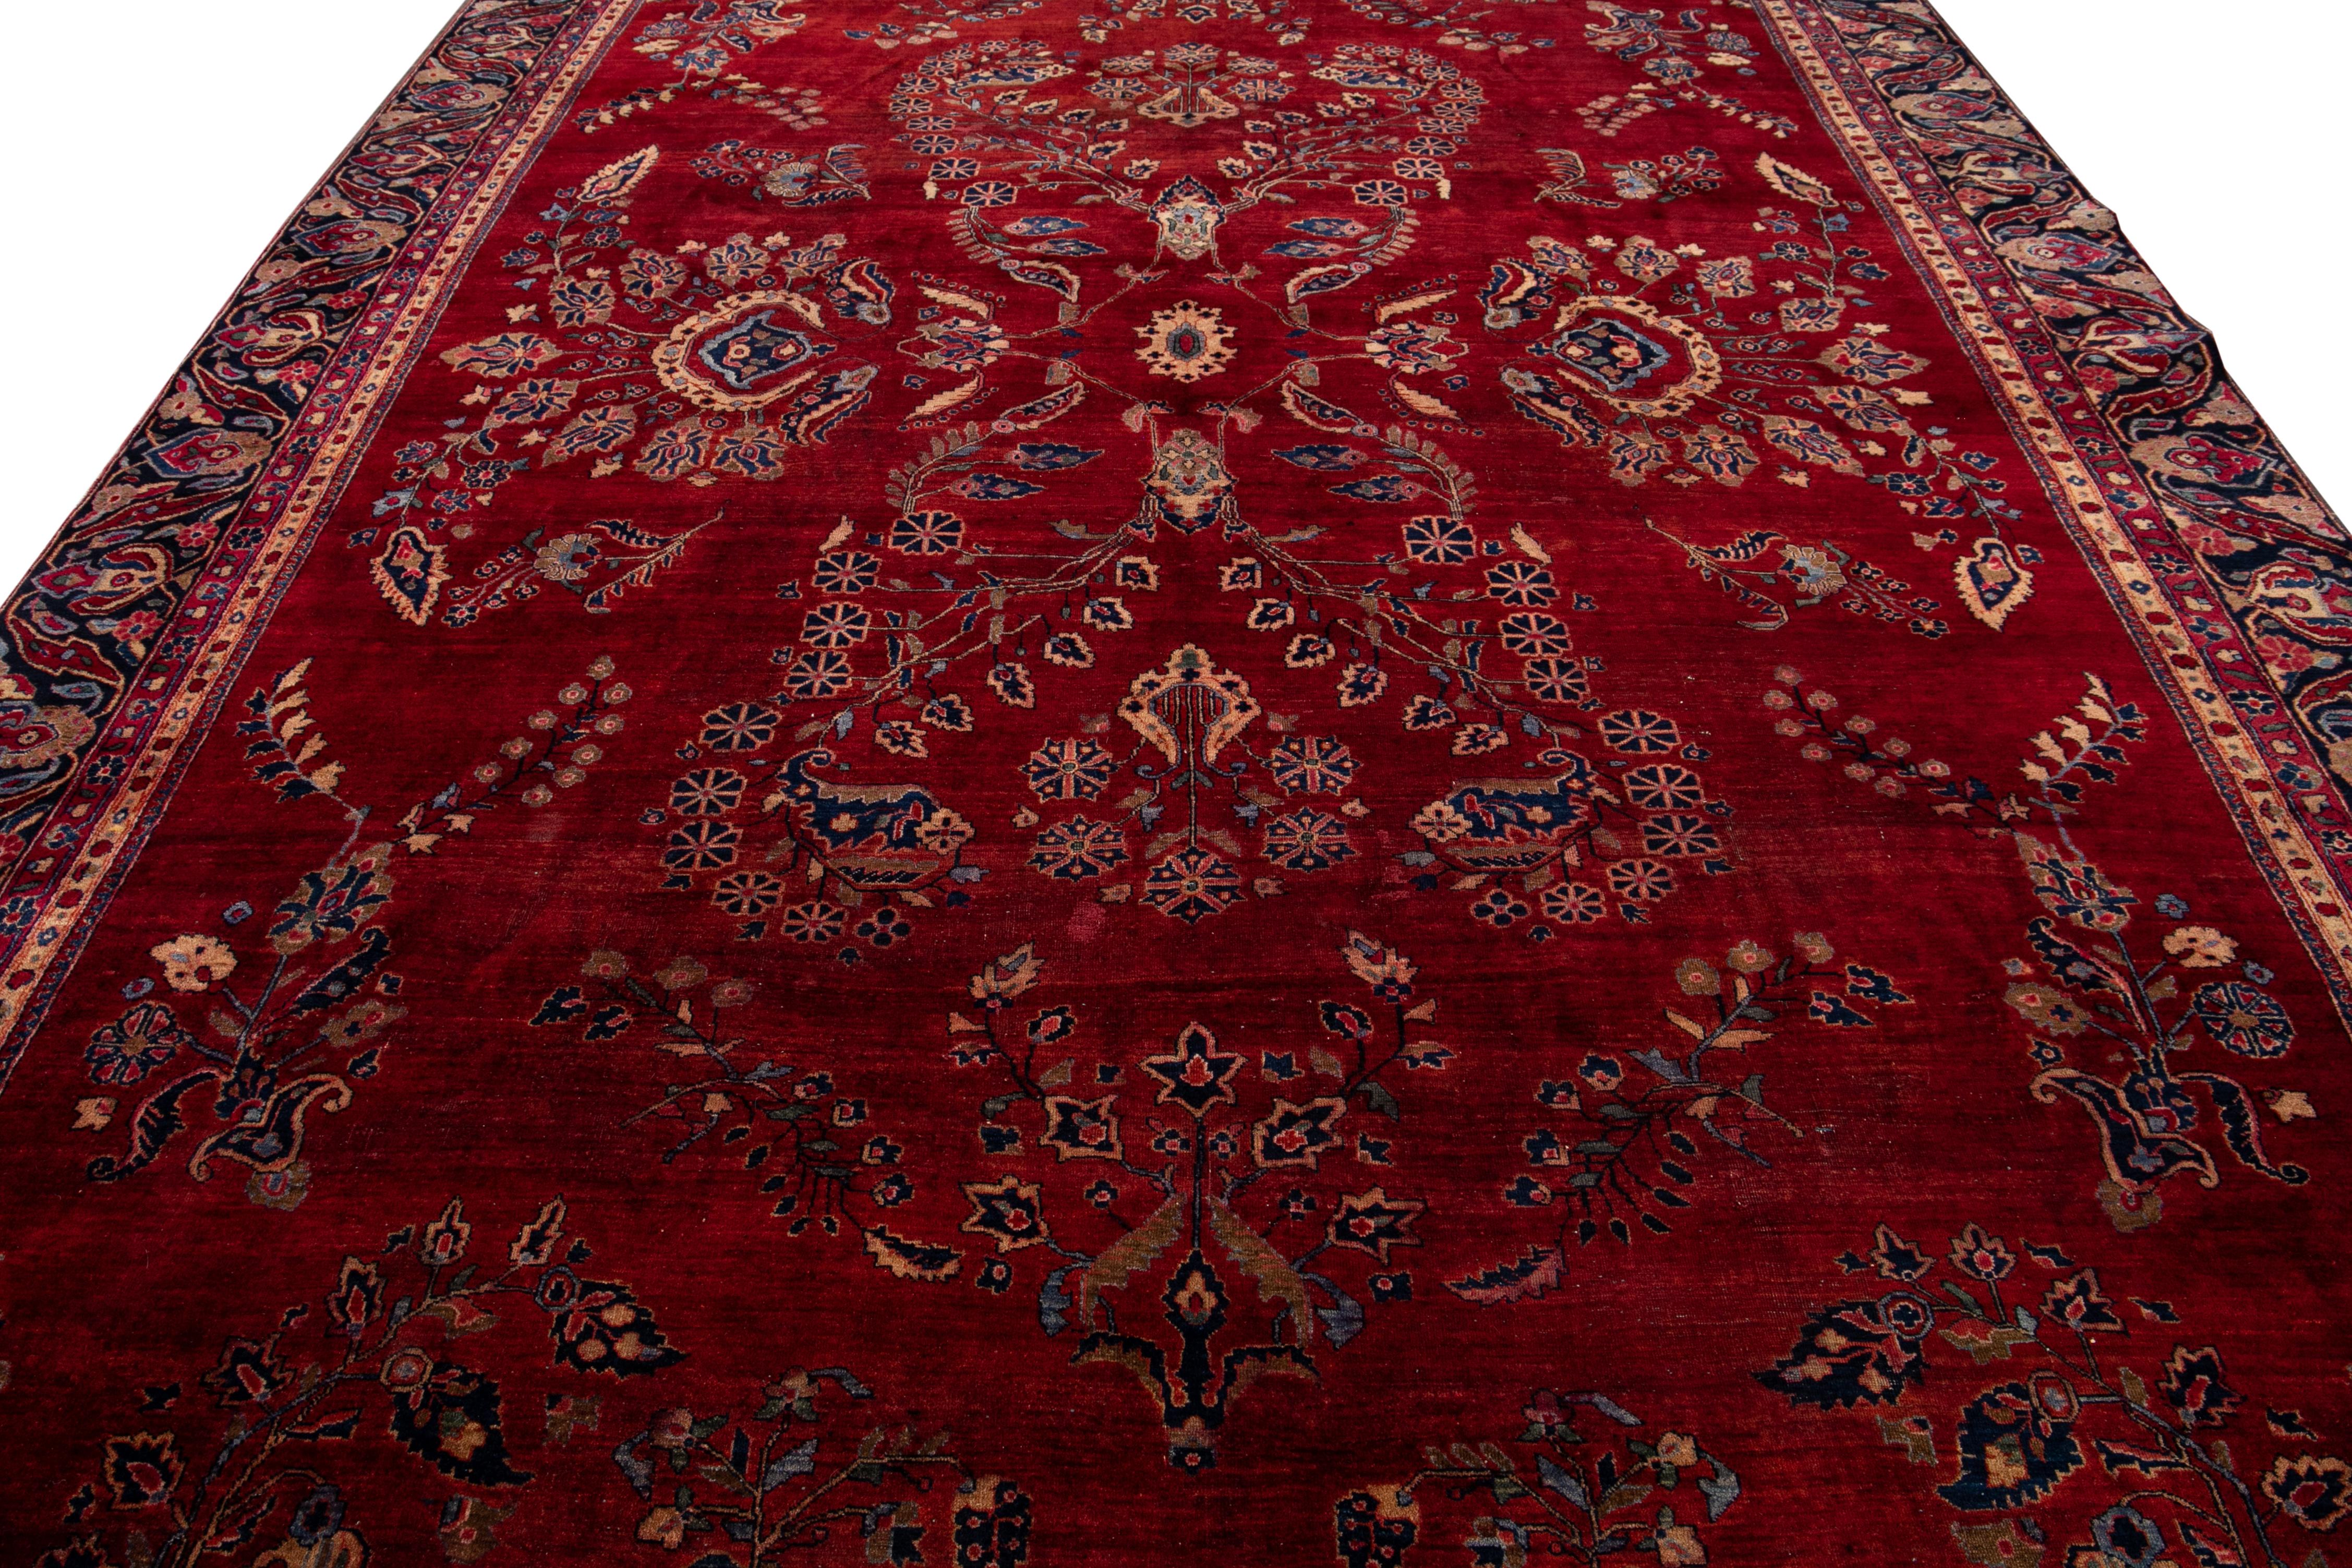 This opulent antique rug of Persian Sarouk origin is crafted by hand and made of wool. It showcases a red field bordered by an intricate blue frame, enriched with variegated details arranged in a breathtakingly intricate overall floral design.

This